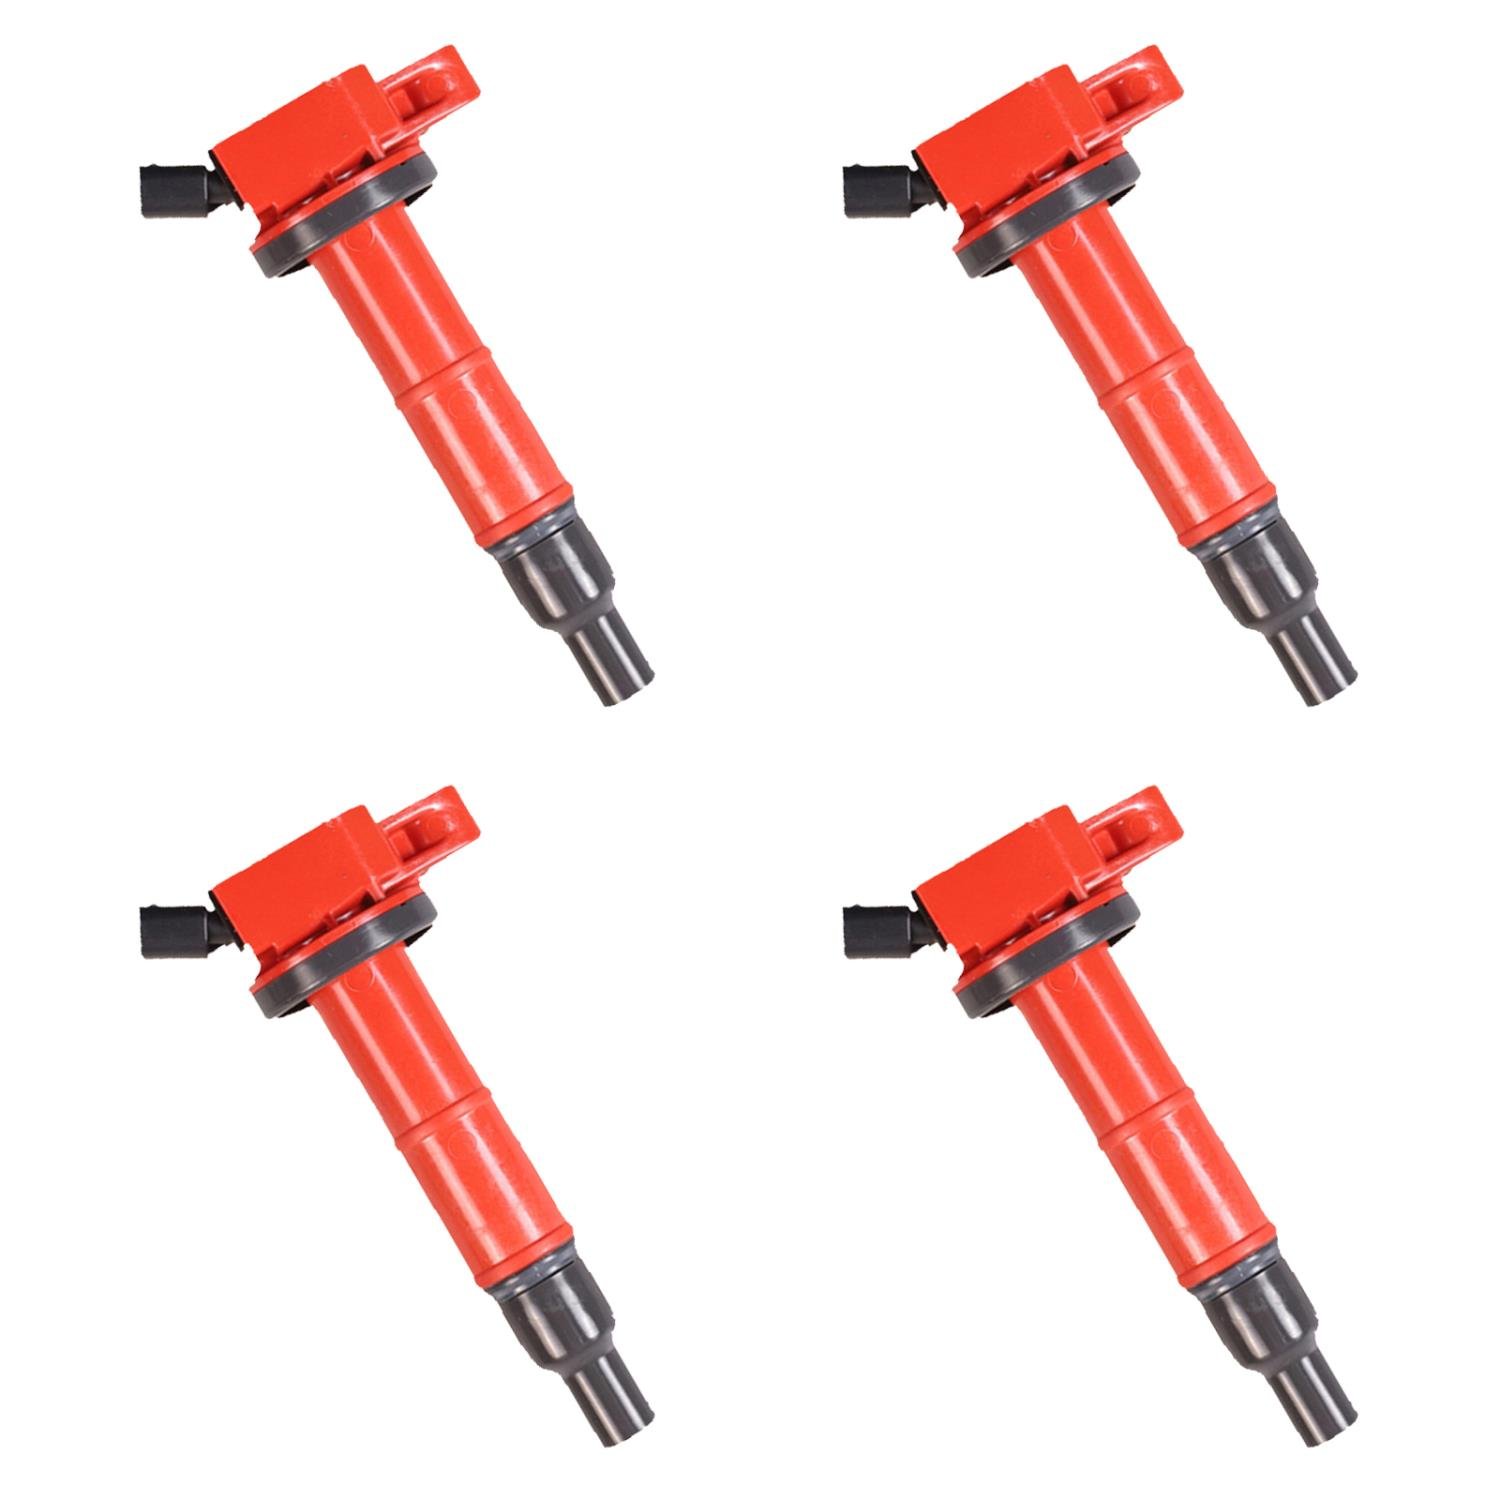 High-Performance Ignition Coils for Toyota Camry 2.4L [Red]